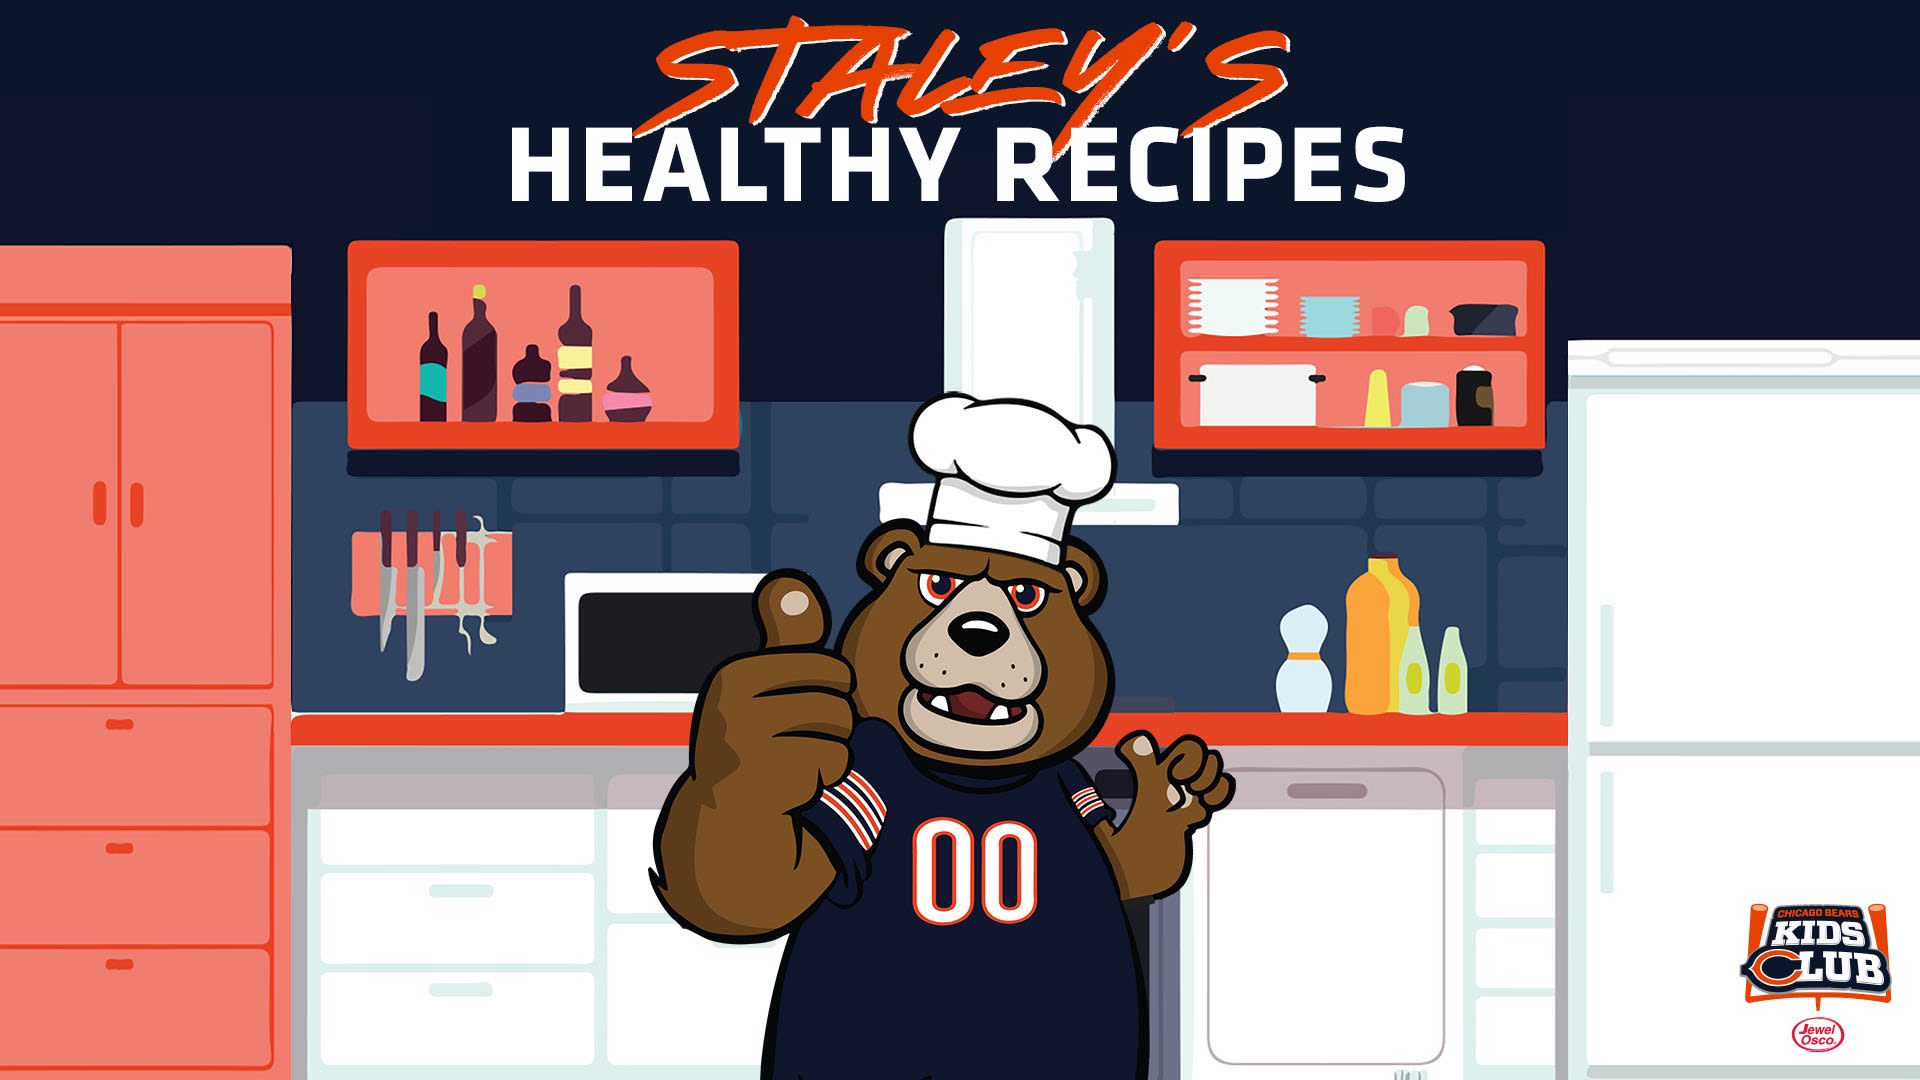 Kids Club At-Home Activities  Chicago Bears Official Website